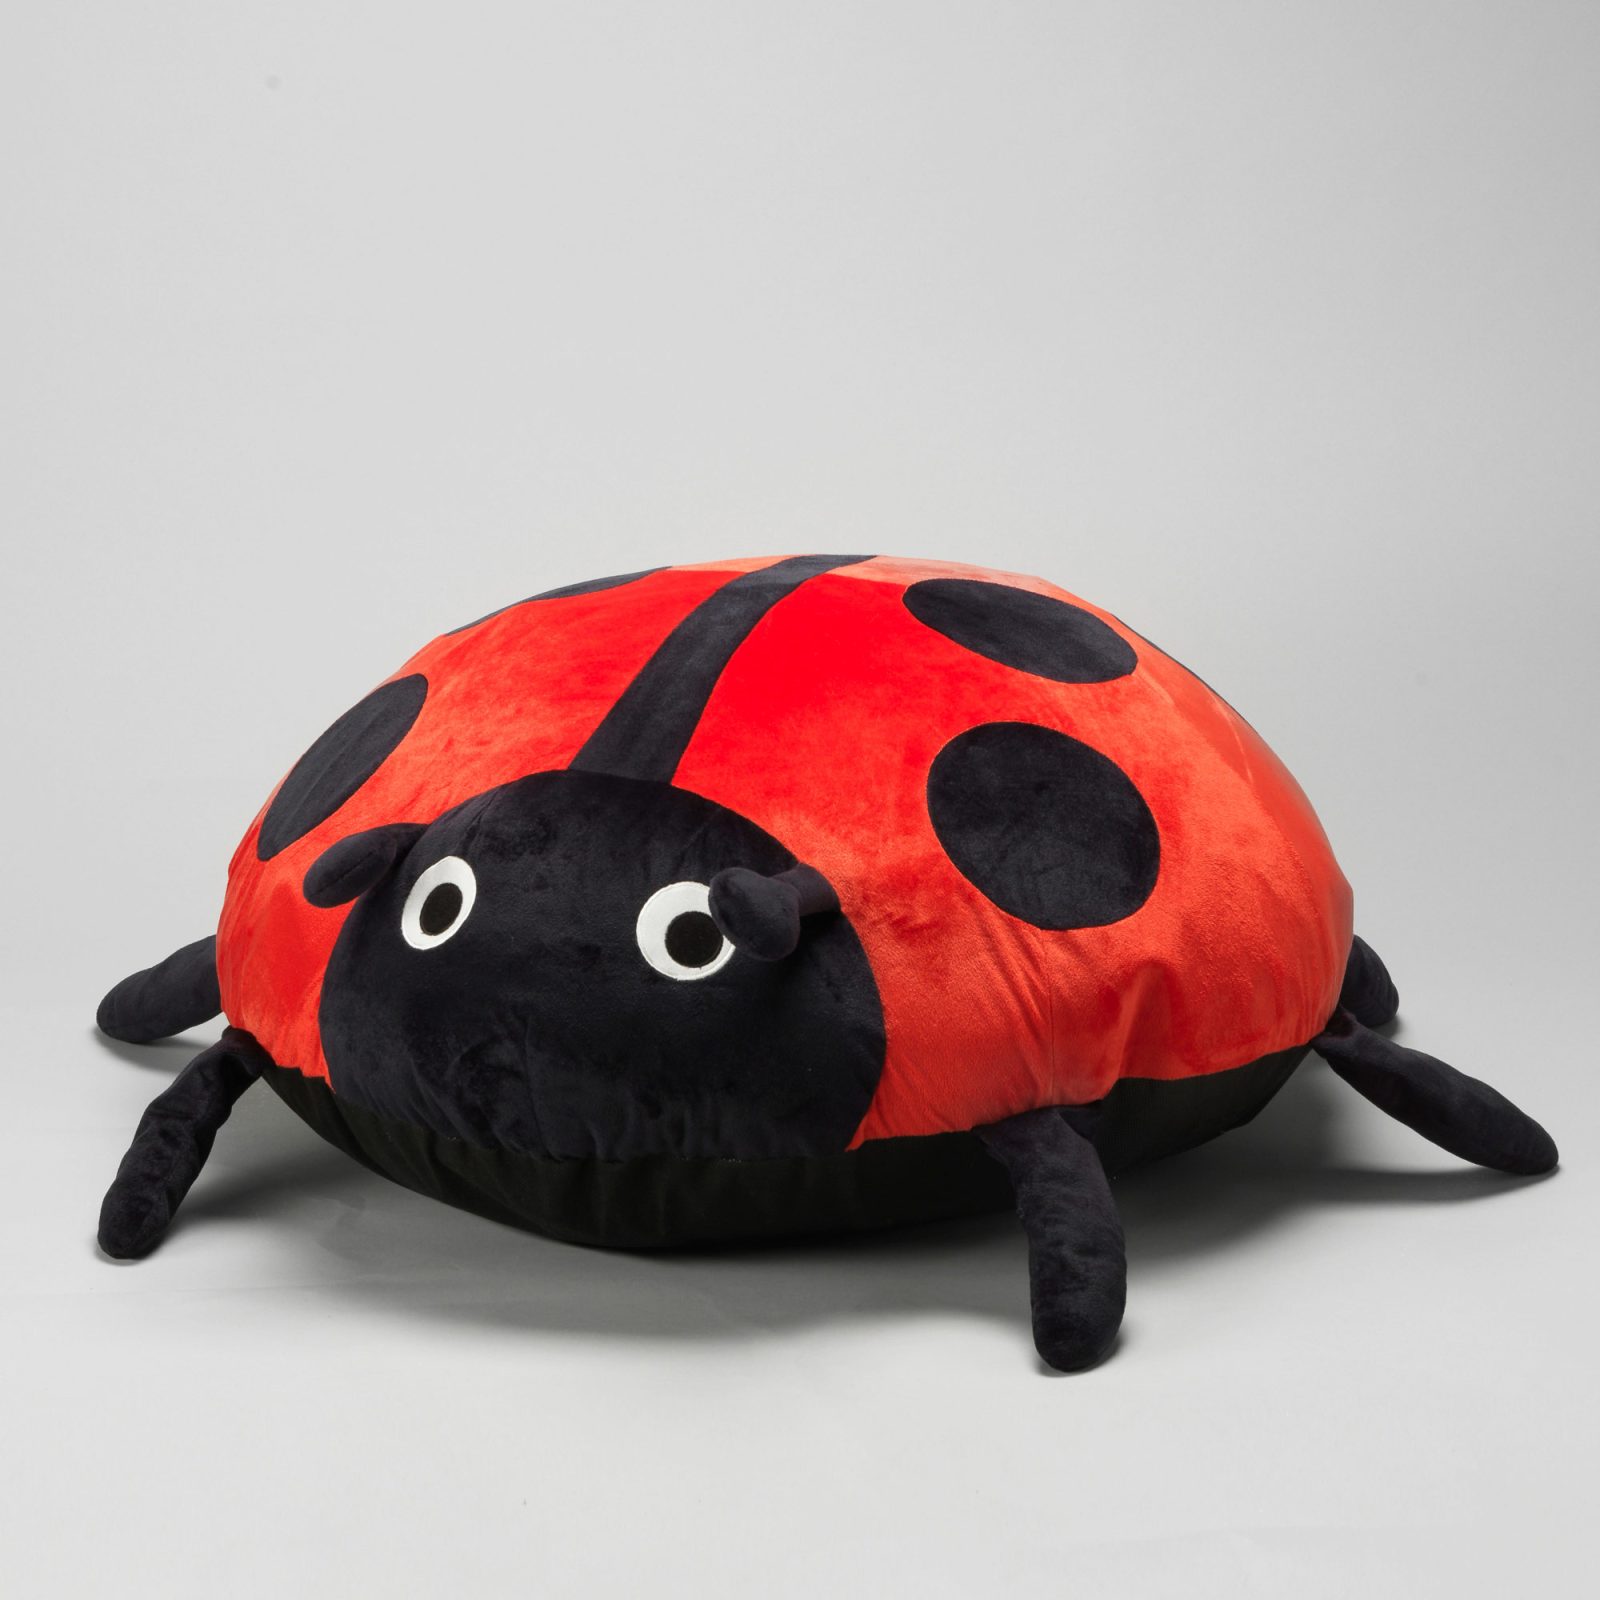 Pillow designed as a red and black ladybird with big round eyes.